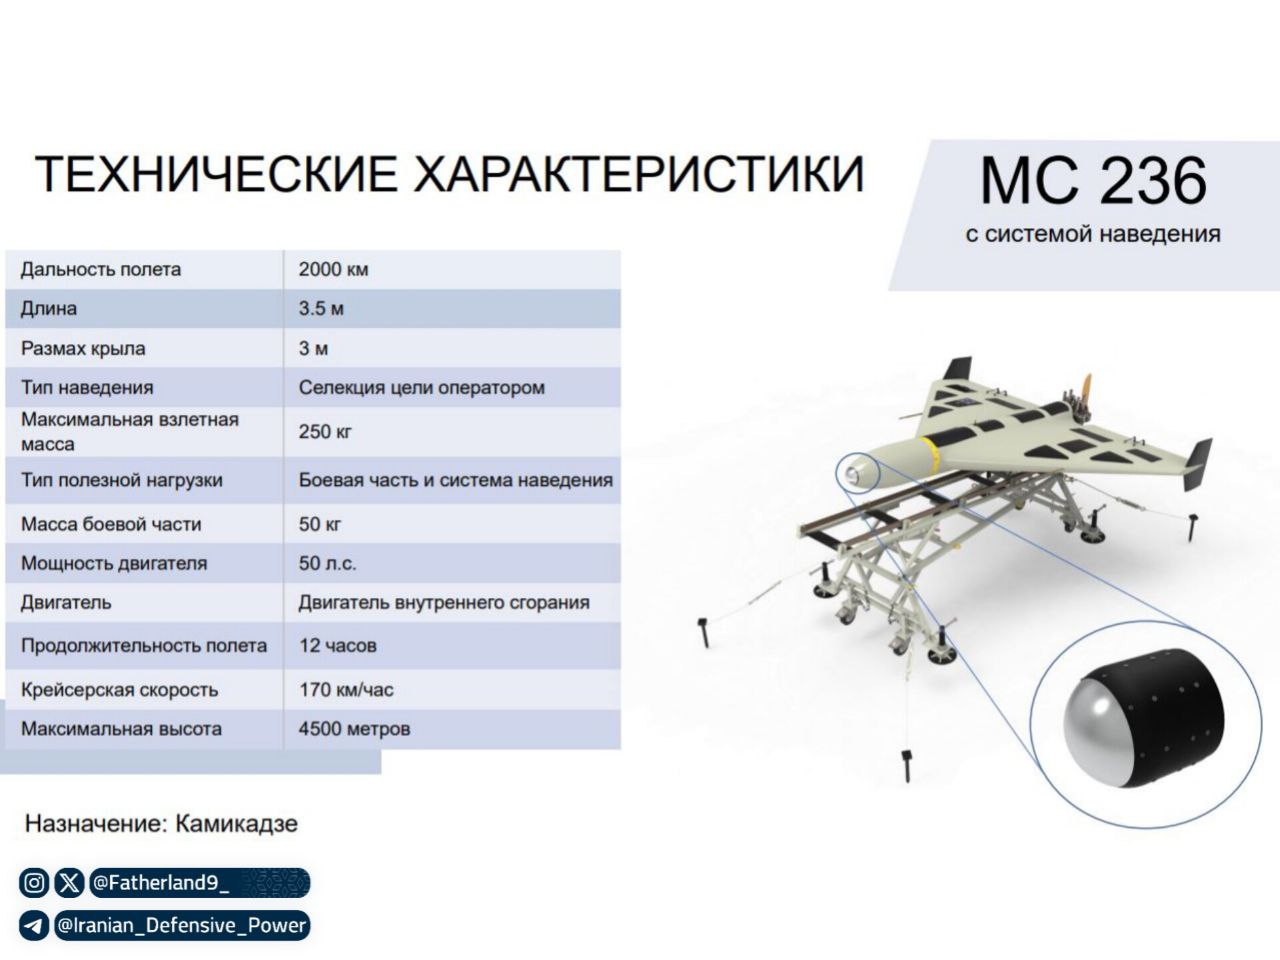 Specification of the russian MS 236 (modified Shahed-136) loitering munition